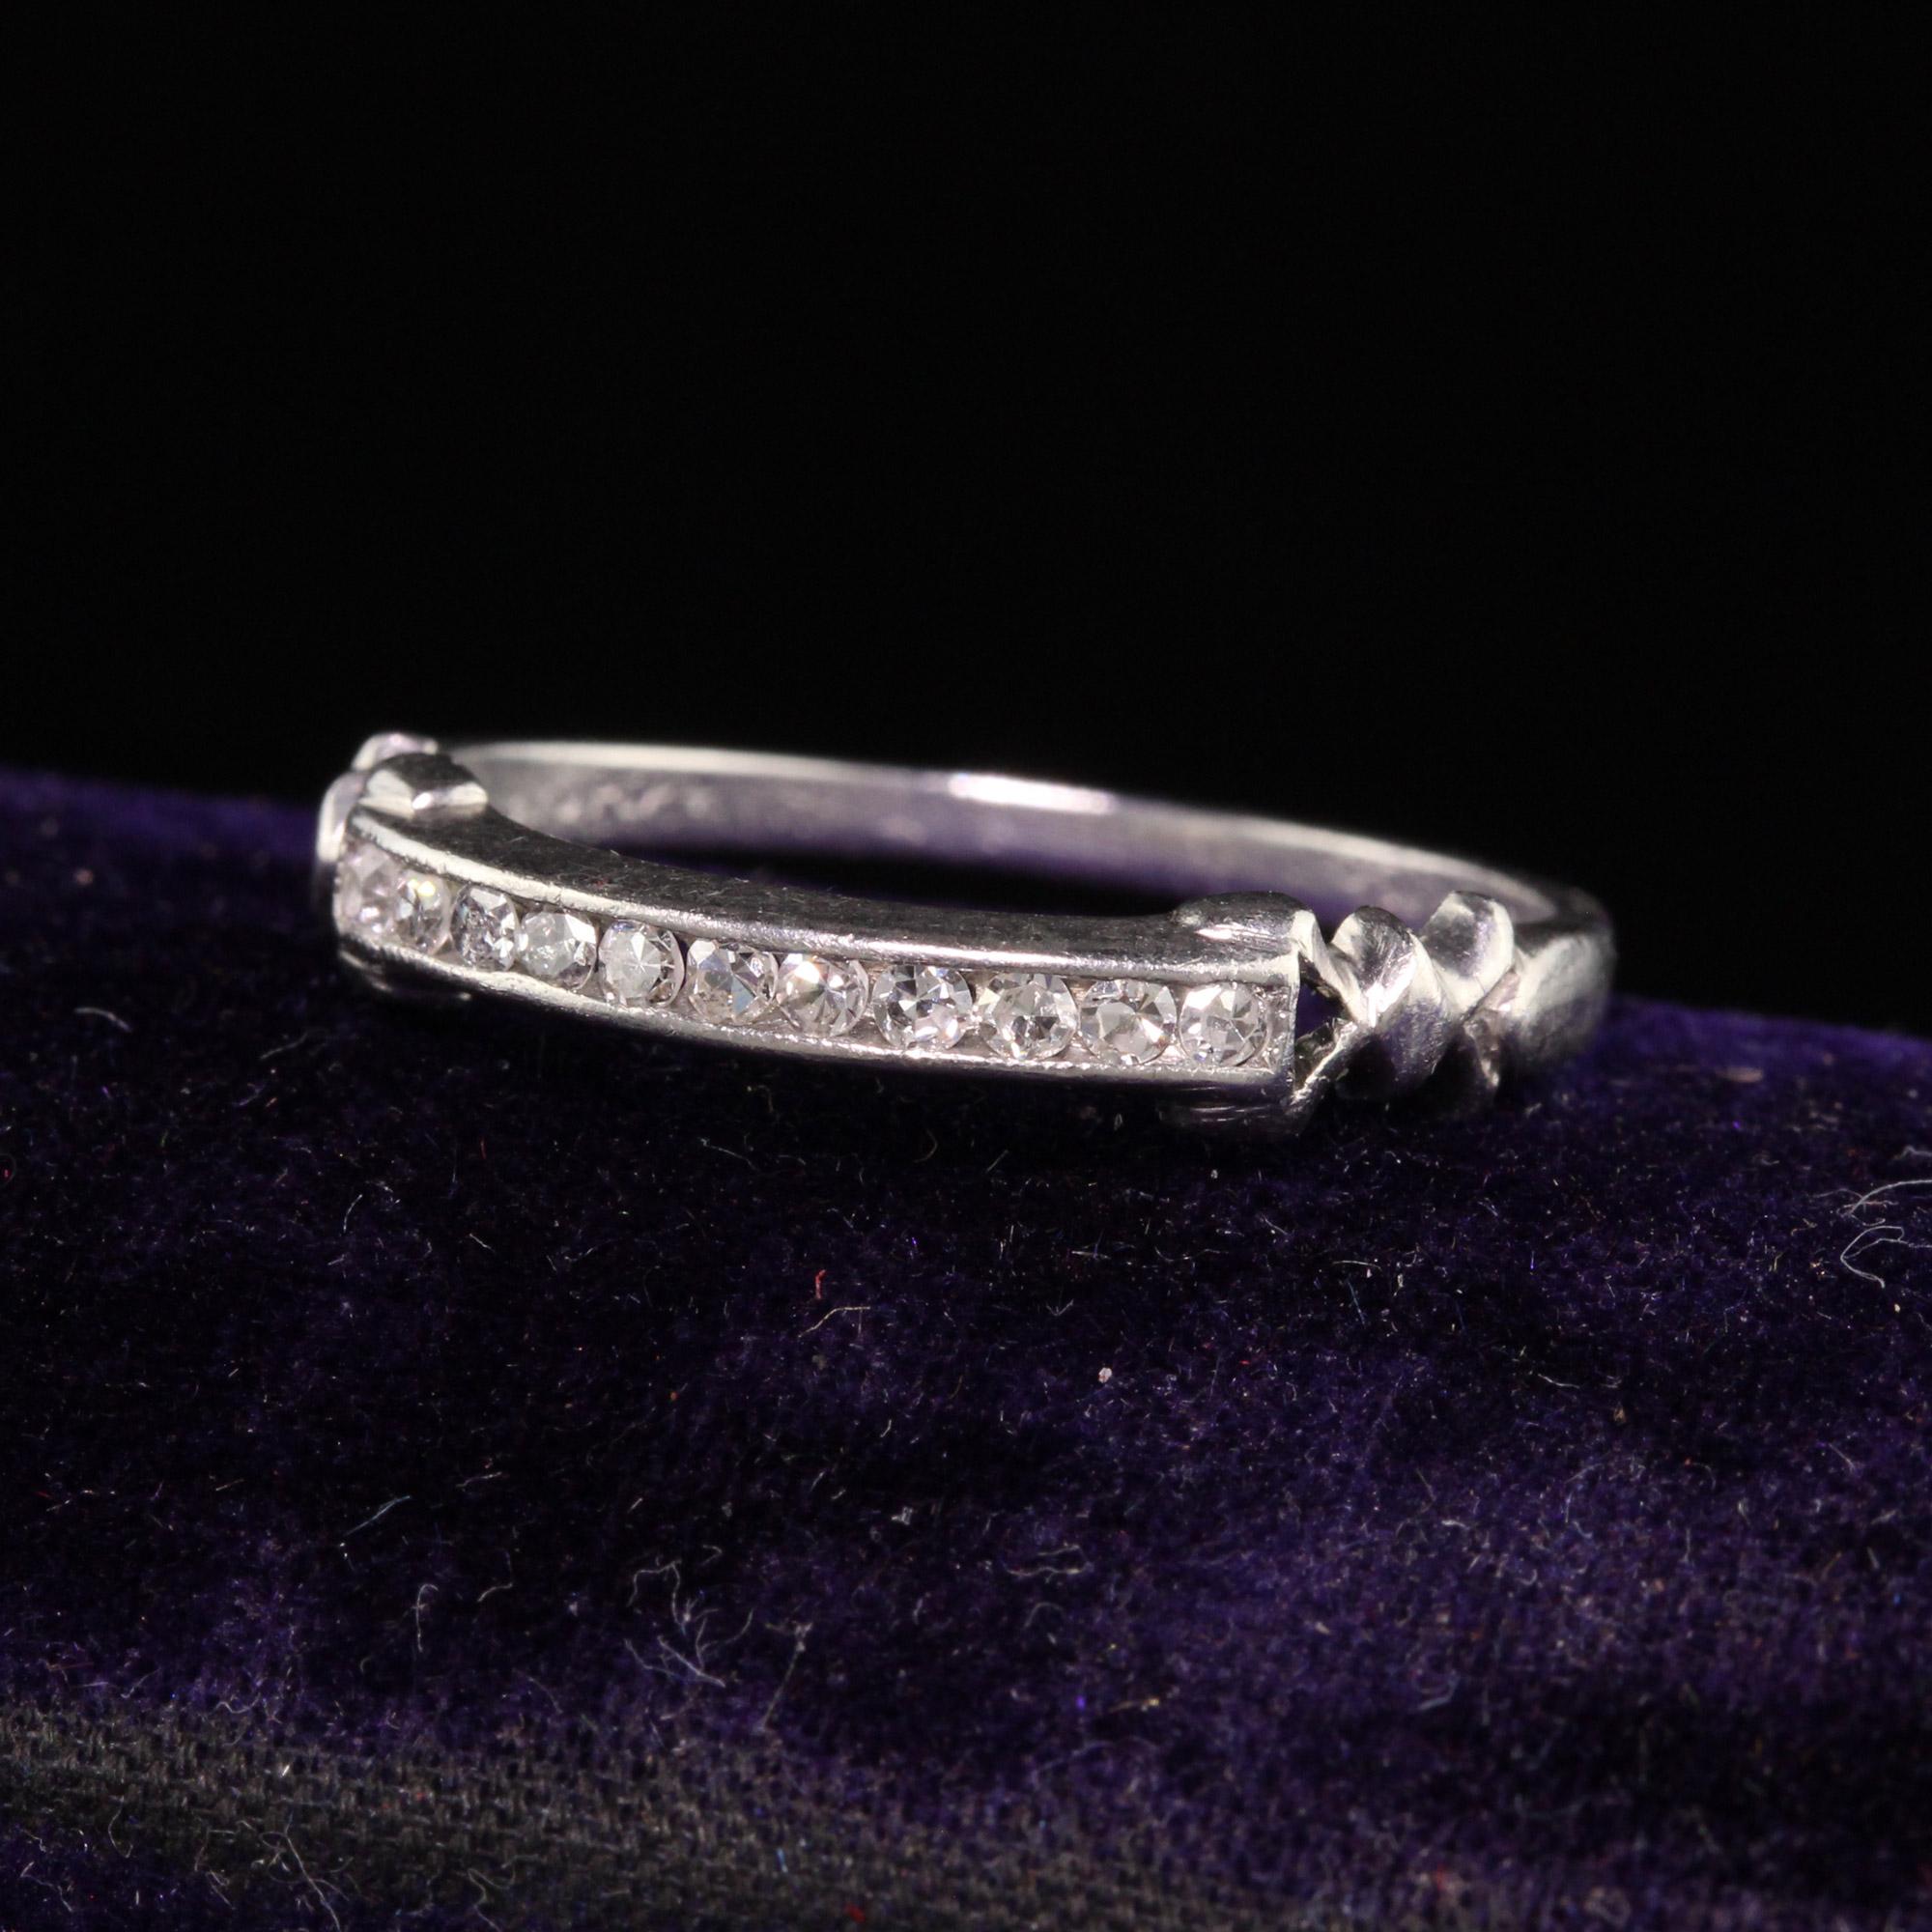 Beautiful Antique Art Deco Platinum Single Cut Diamond Wedding Band. This beautiful wedding band features single cut diamonds on the top of the ring with ribbon accents on the sides.

Item #R1120

Metal: Platinum

Weight: 2.8 Grams

Size: